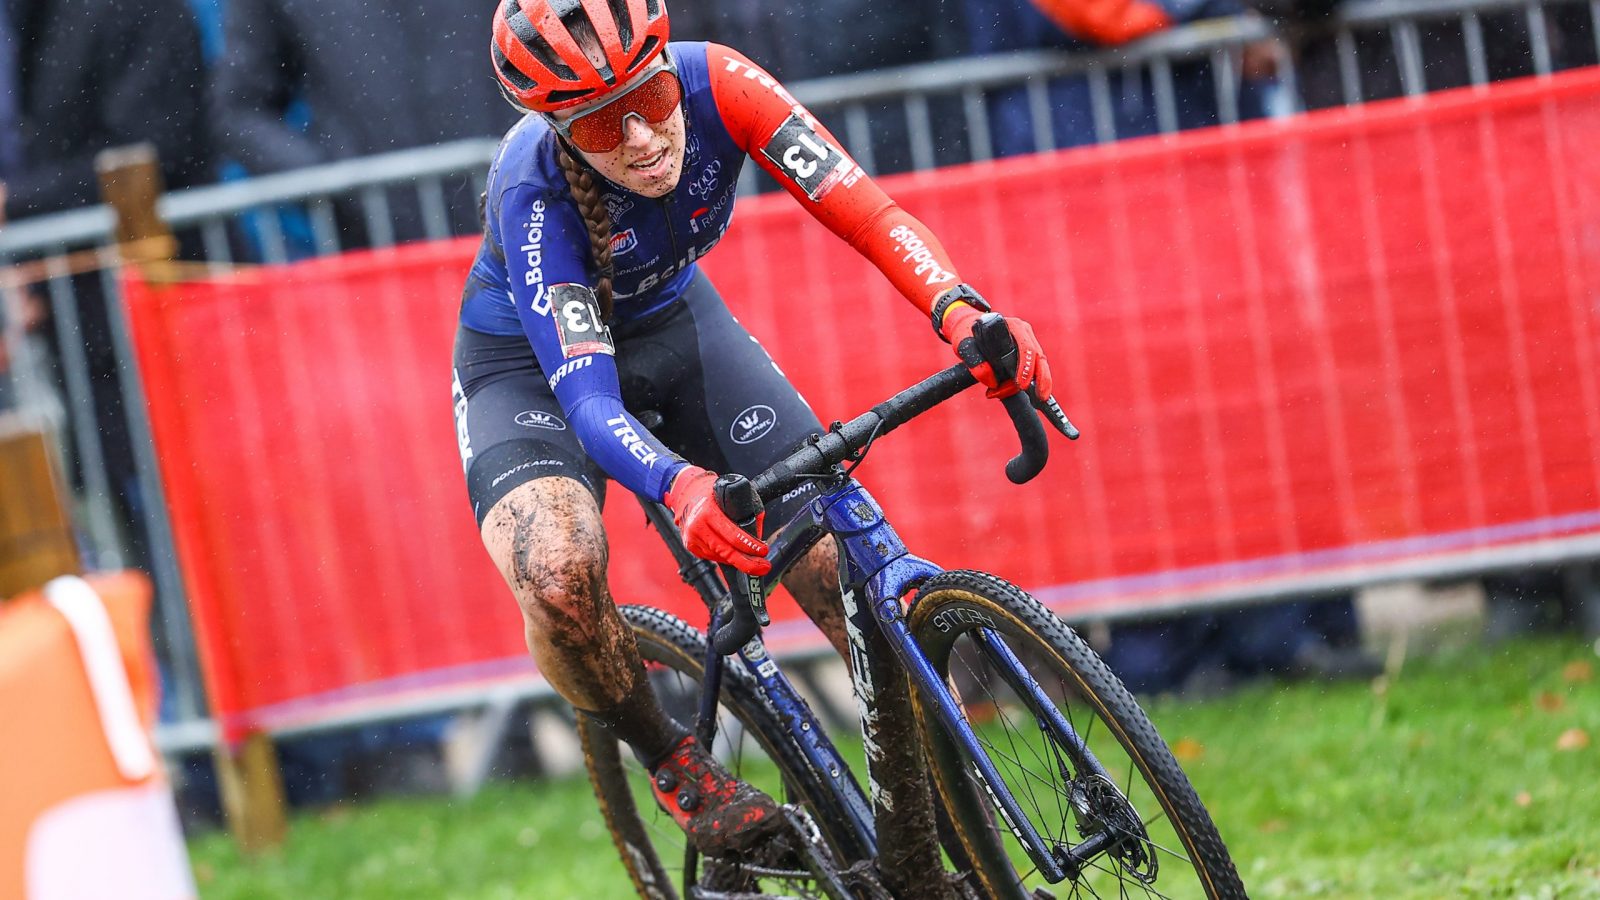 Dutch Shirin van Anrooij pictured in action during the women's elite race of the World Cup cyclocross cycling event in Hulst, the Netherlands, stage 7 (out of 14) of the UCI World Cup cyclocross competition, Sunday 27 November 2022. BELGA PHOTO DAVID PINTENS